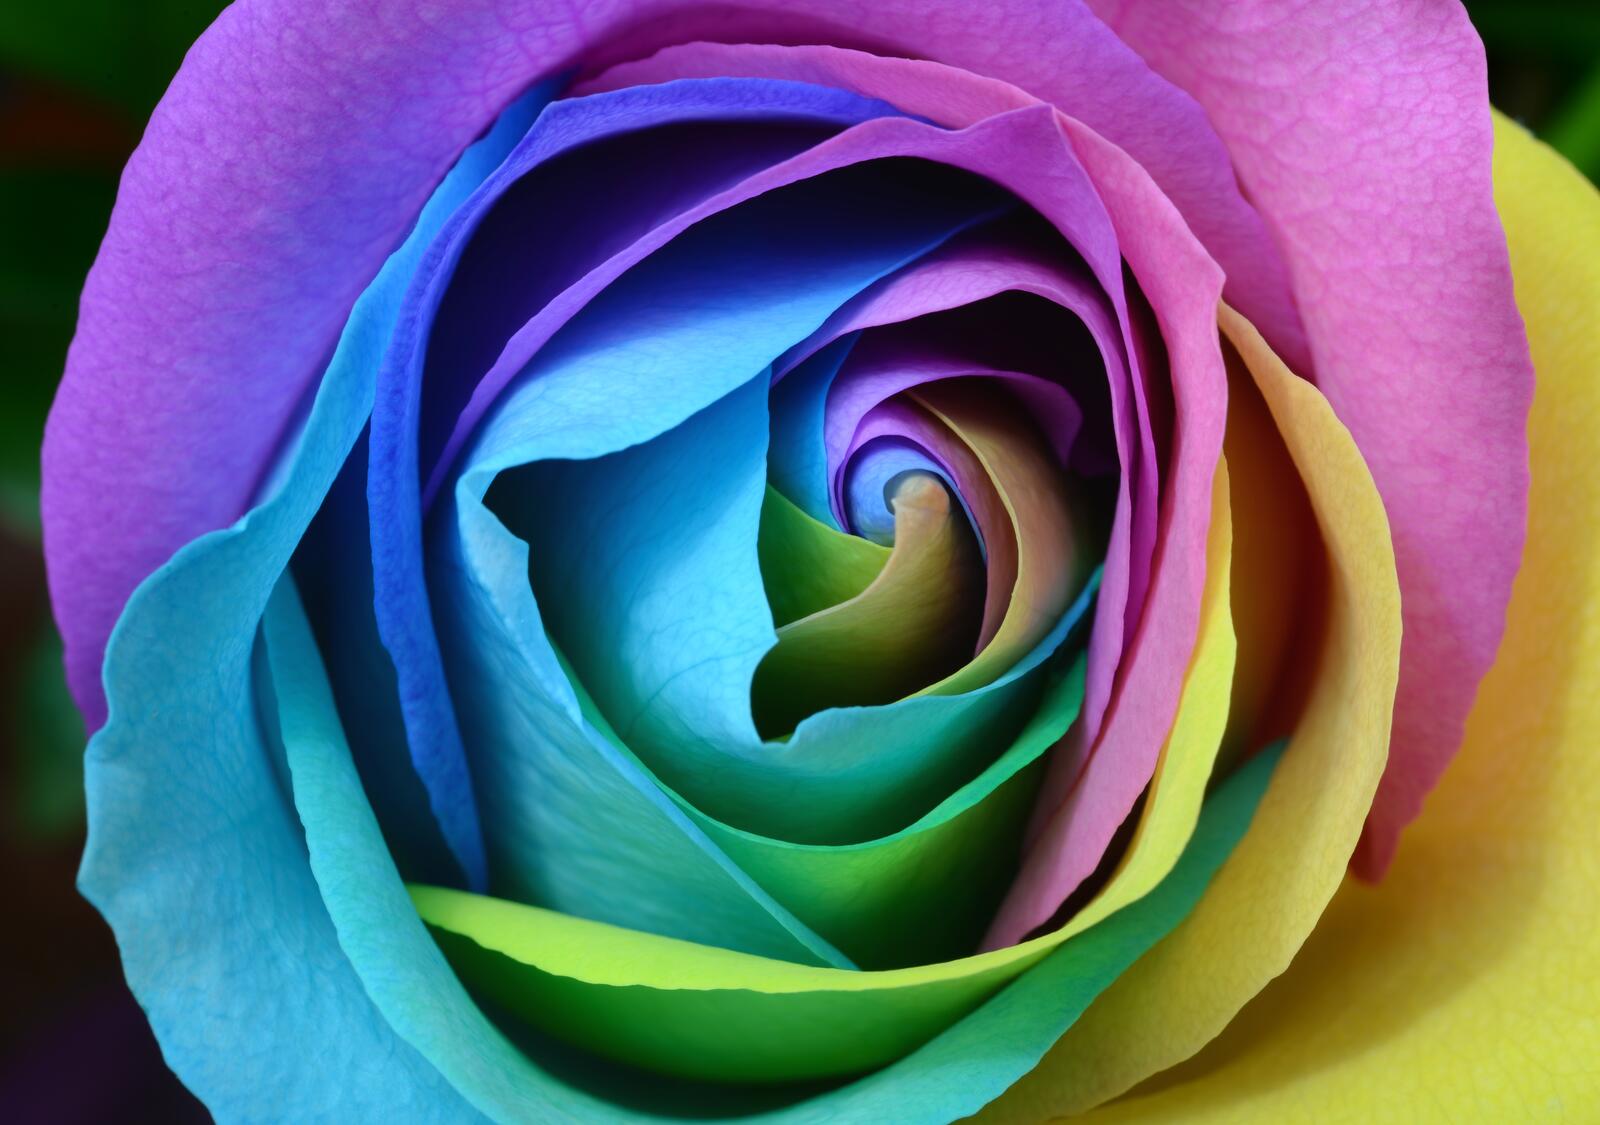 Wallpapers rose colorful bud on the desktop